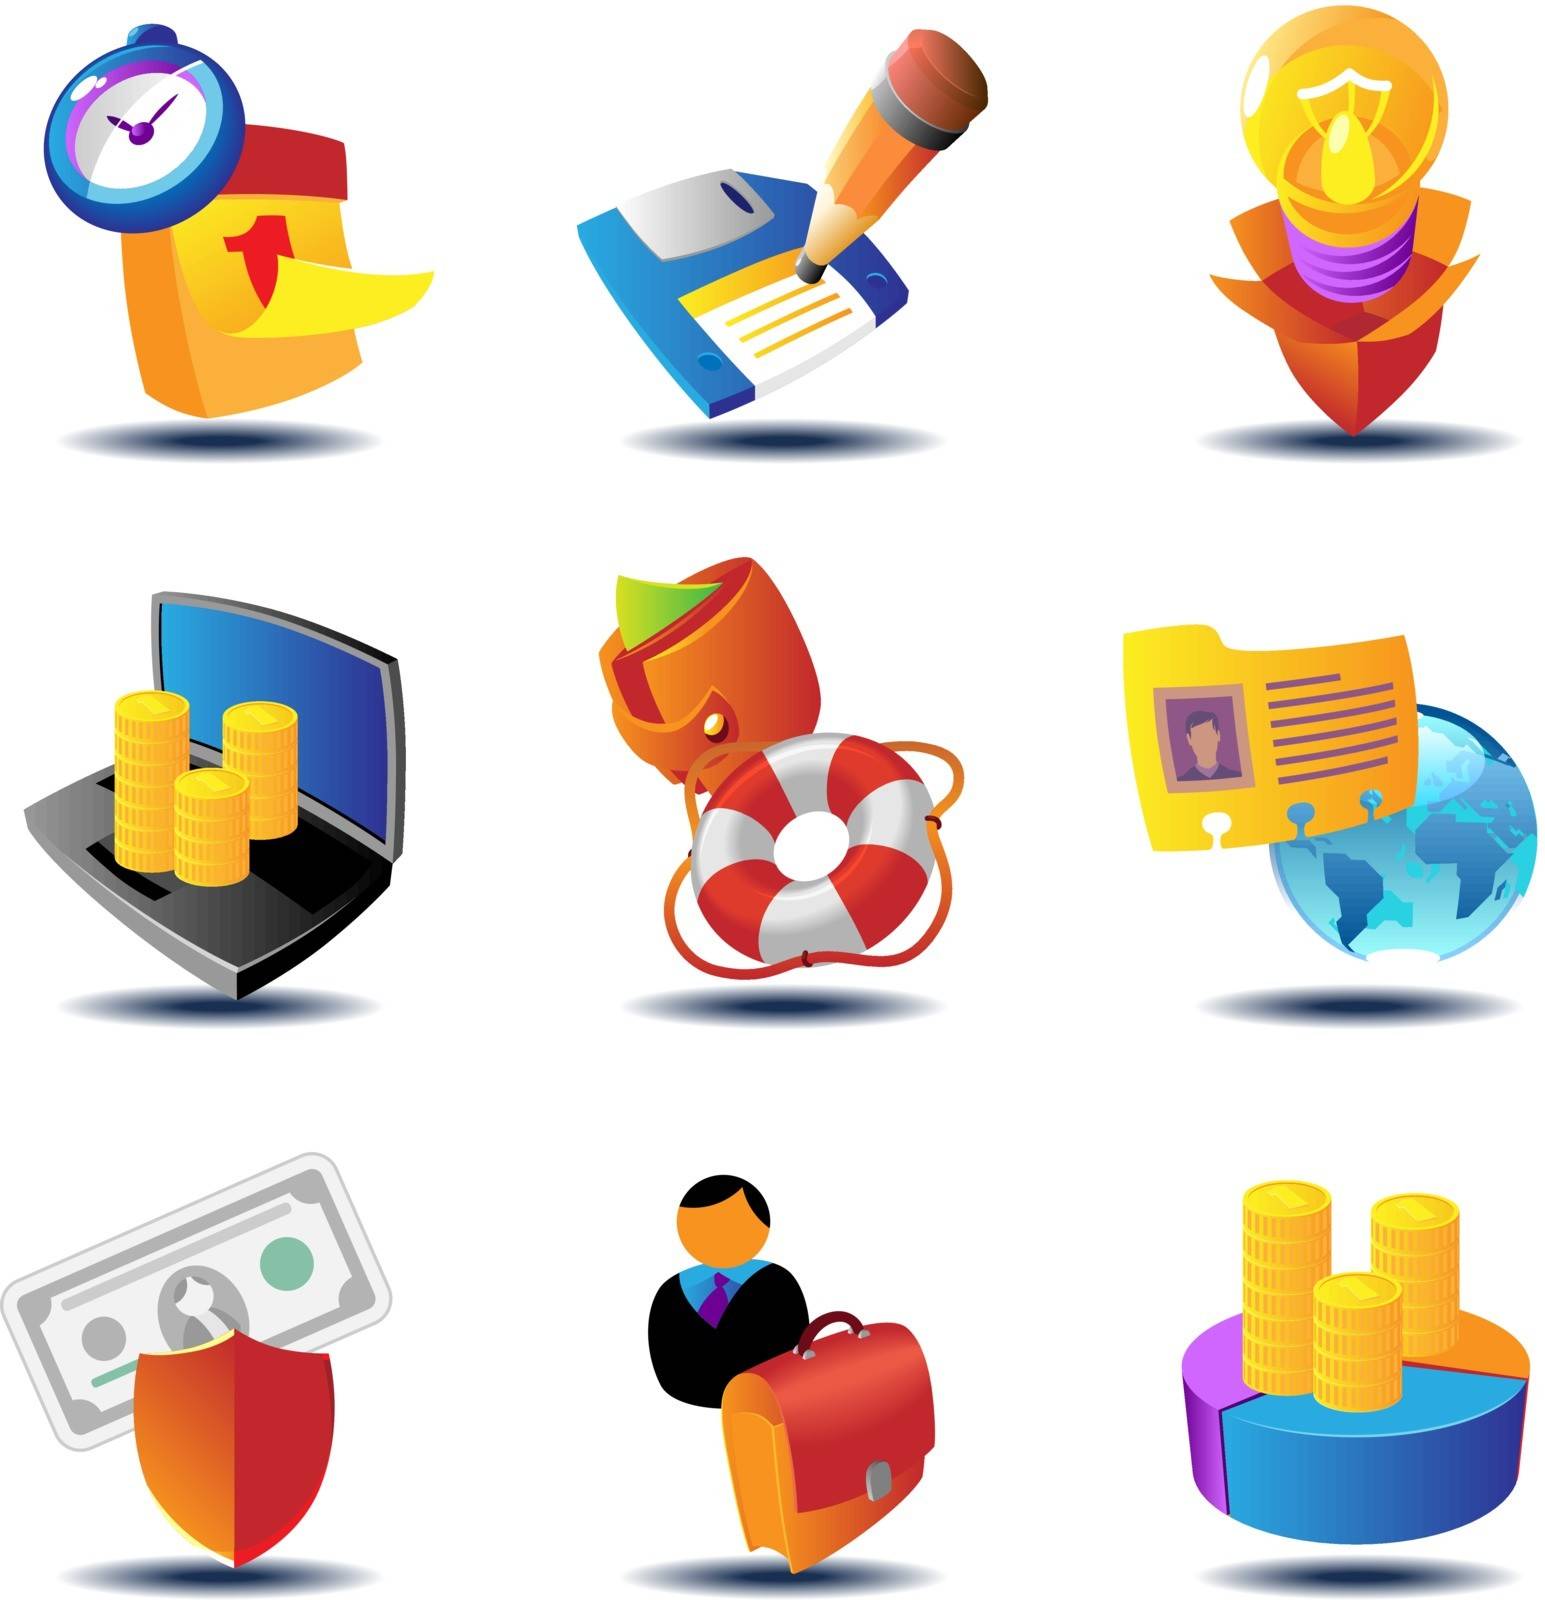 Business metaphor icons. Vector illustration concept.